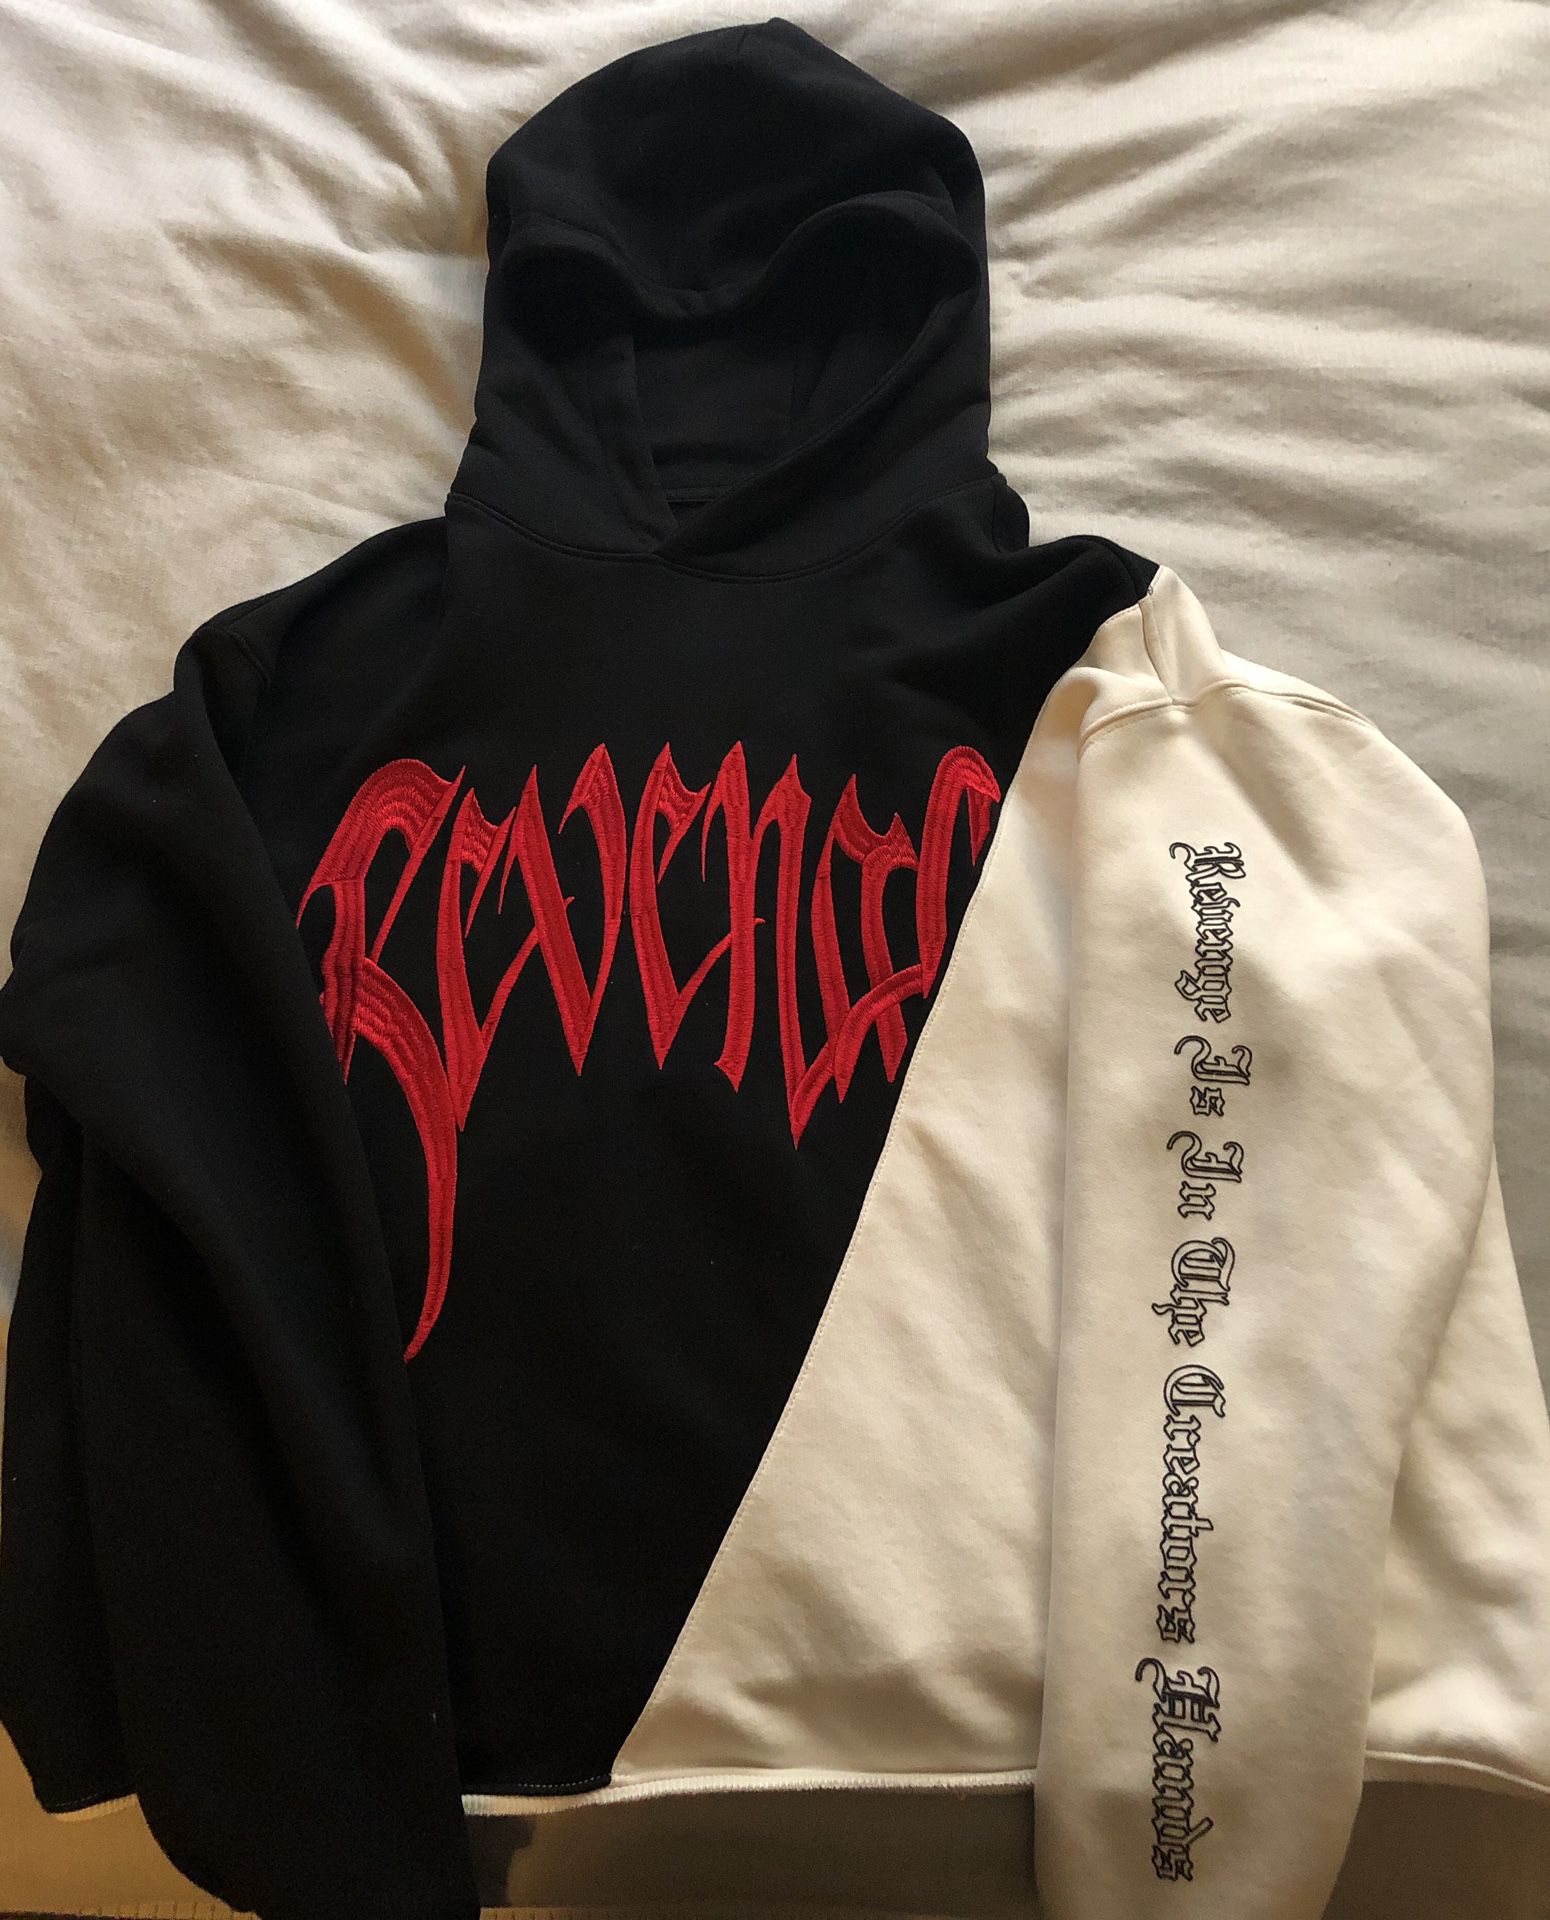 Revenge split hoodie embroidered for Sale in Oxnard, CA - OfferUp